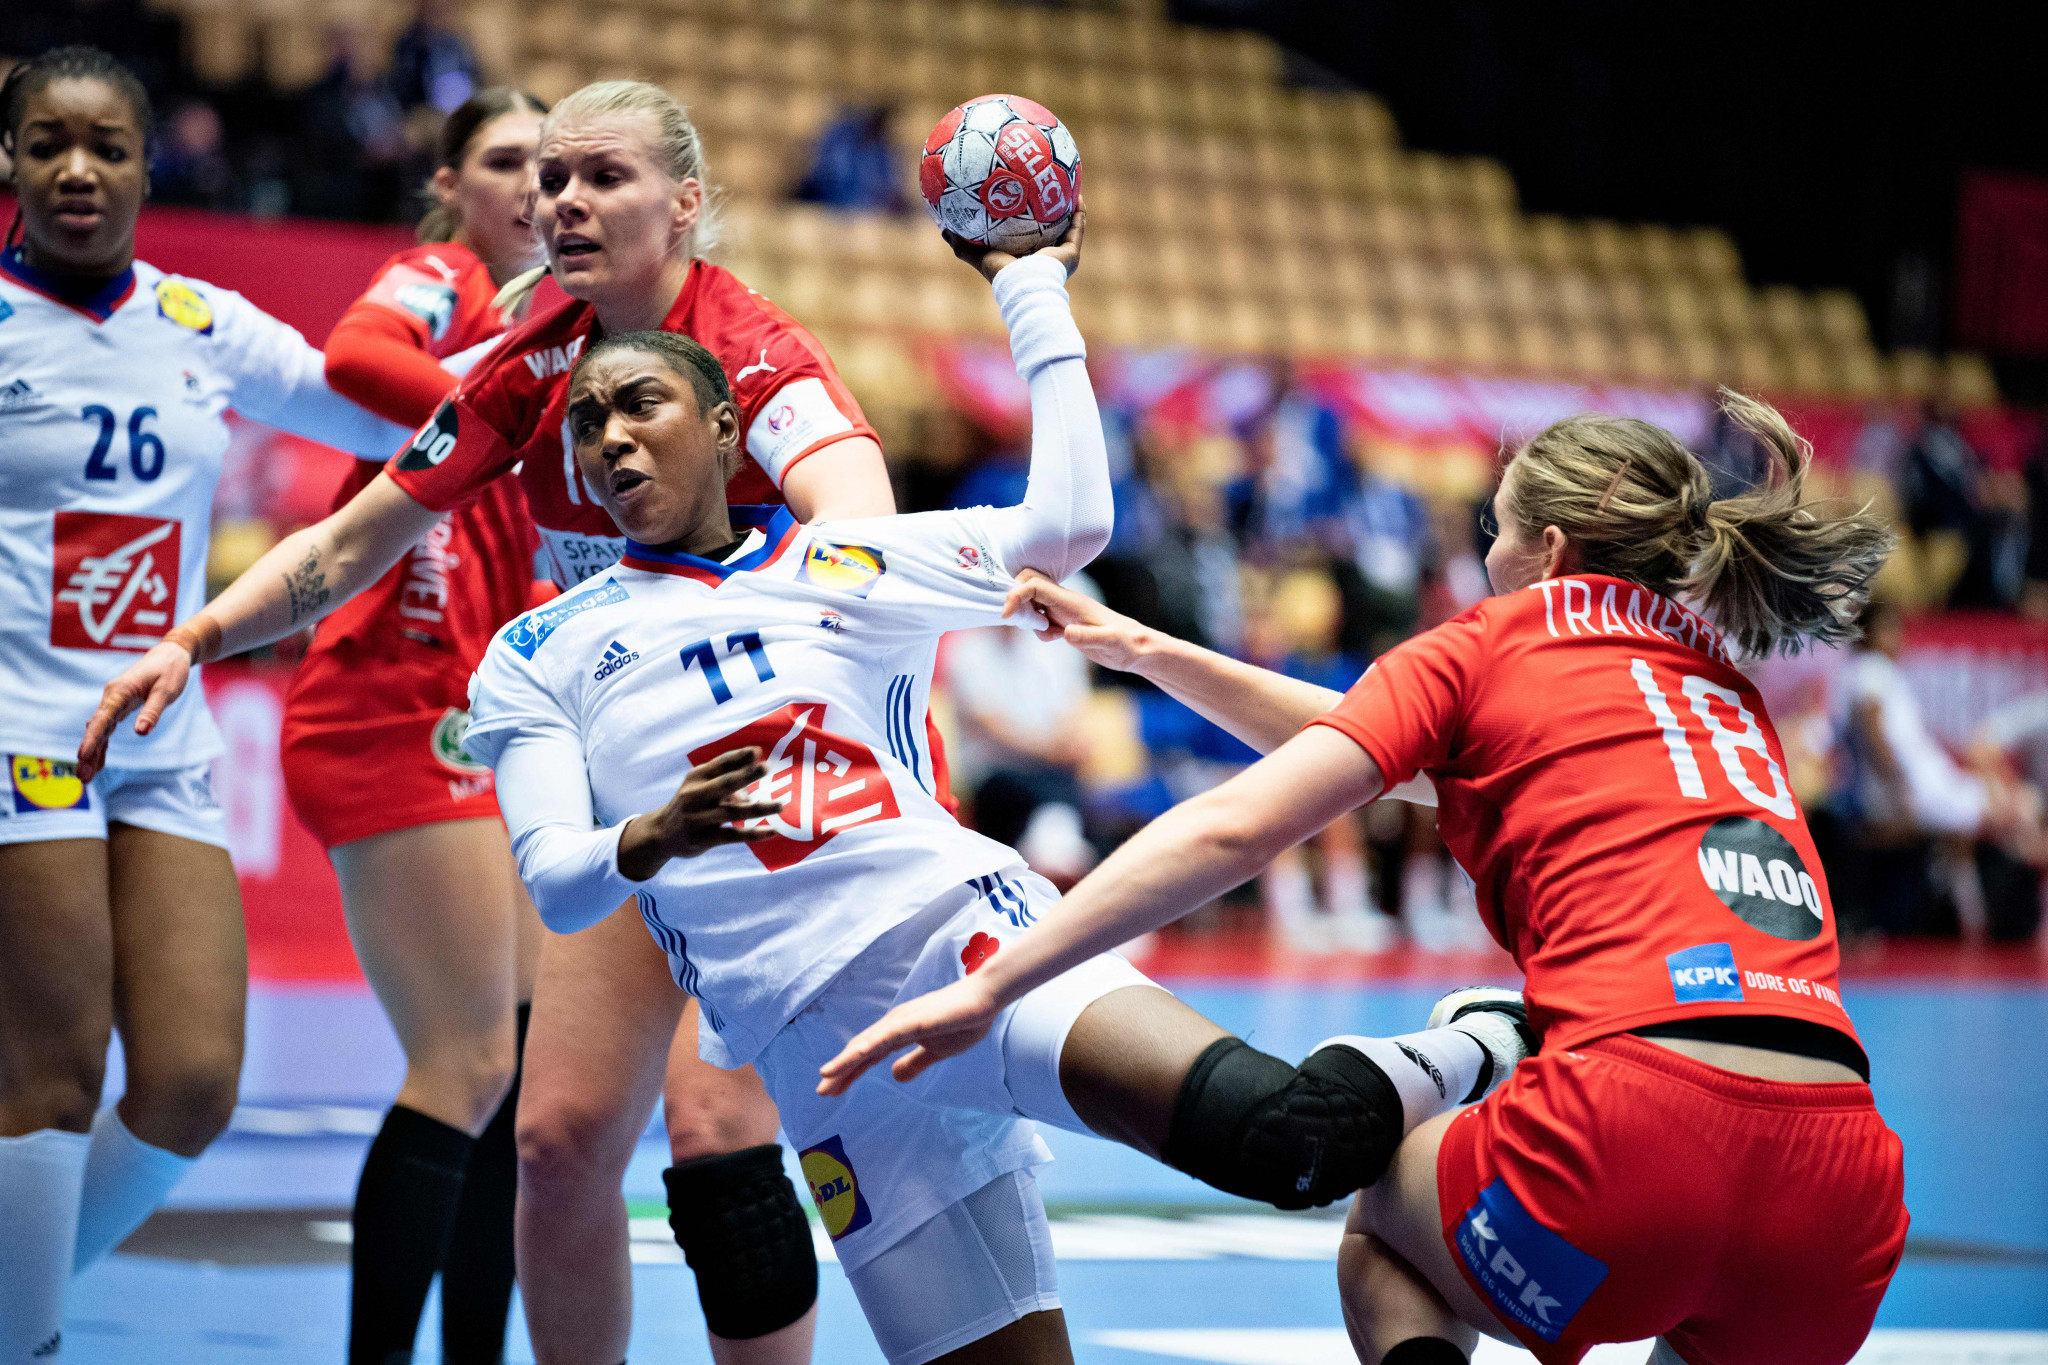 Serbia and Slovenia agonisingly knocked out of European Women's Handball Championship after one goal losses